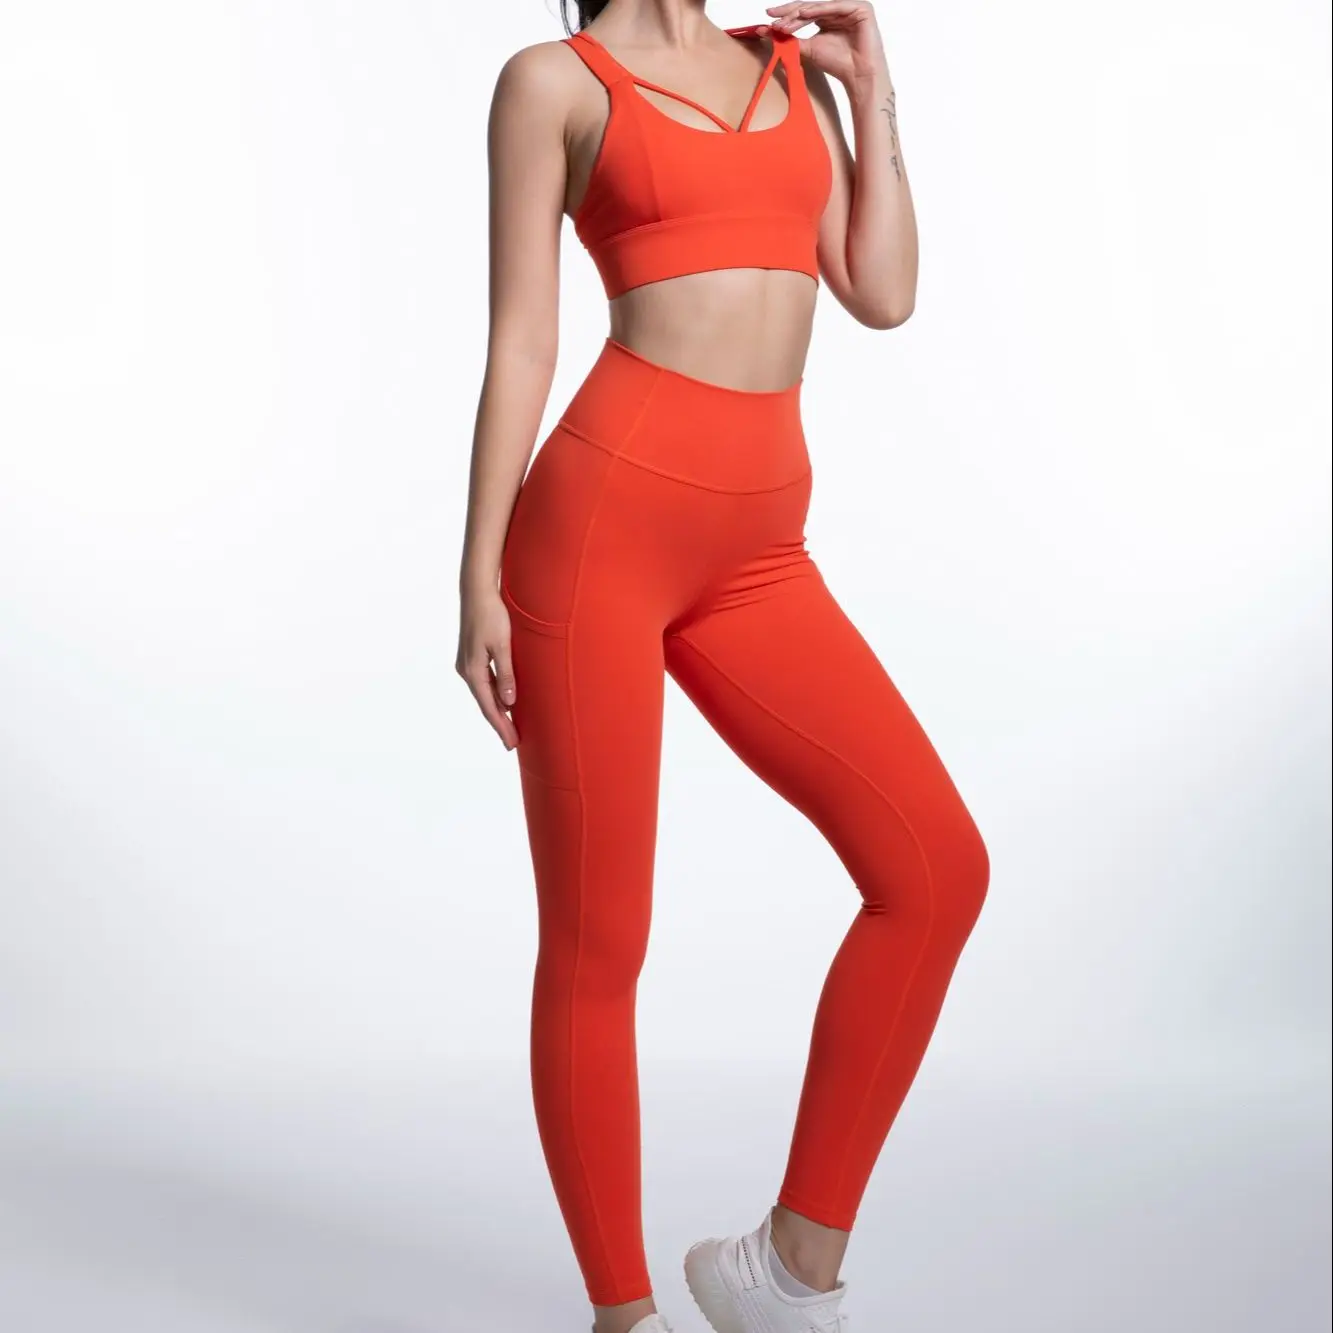 NEW 2 Piece Women Yoga Set  Peach Butt High Waist Female Fitness Runing Breathable Shorts Elasticity Tracksuit Sport Gym Suit